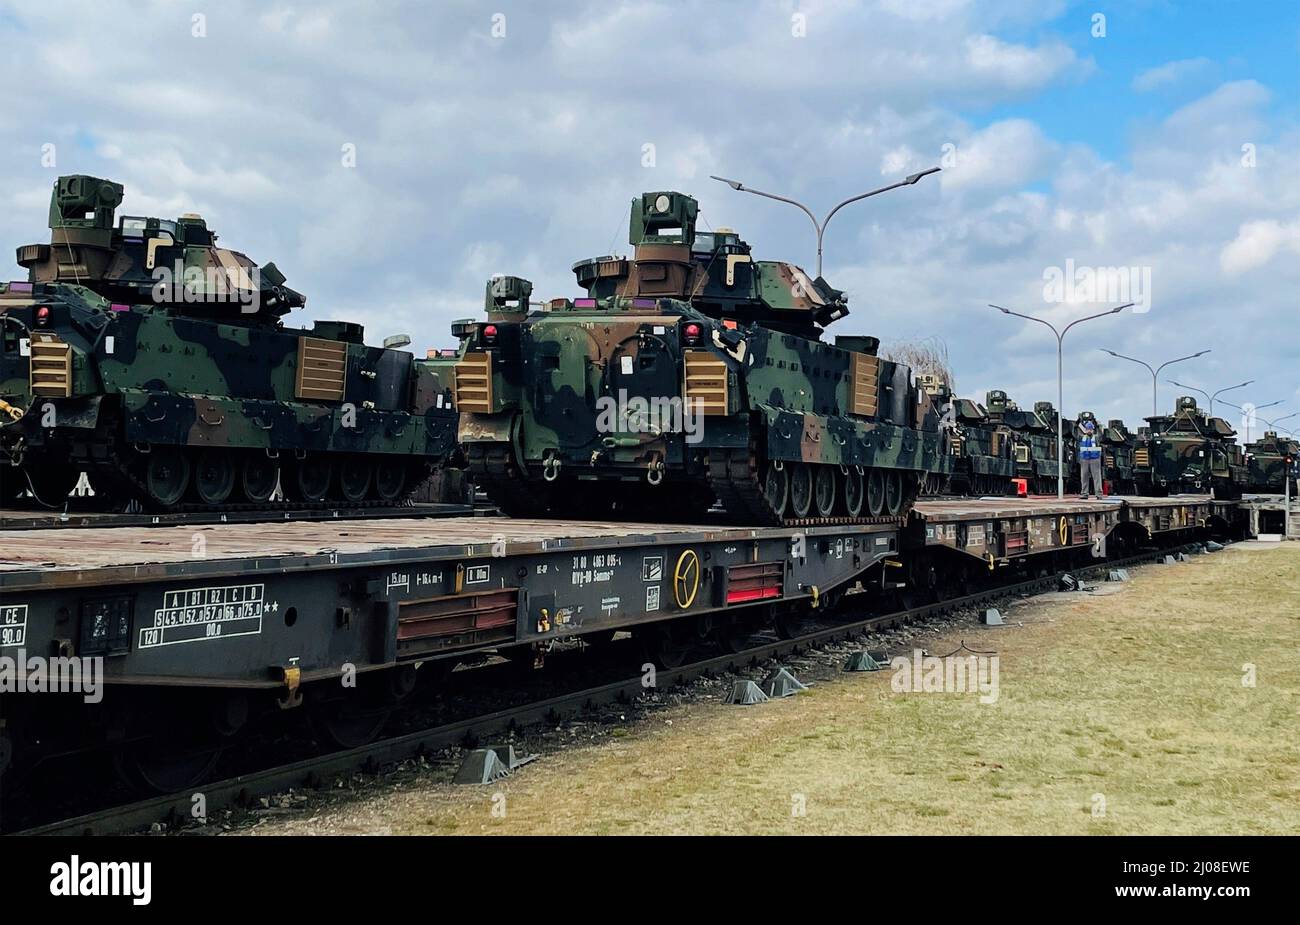 Mannheim, Germany. 16th Mar, 2022. U.S. Army M2 Bradley infantry fighting vehicles are loaded onto a German rail car at Coleman worksite March 16, 2022 in Mannheim, Germany. The U.S. military is moving an entire armored brigade from prepositioned stocks to Grafenwoehr Training Area as NATO enhances security following the Russian invasion of Ukraine. Credit: Maj. Allan Laggui/U.S Army/Alamy Live News Stock Photo